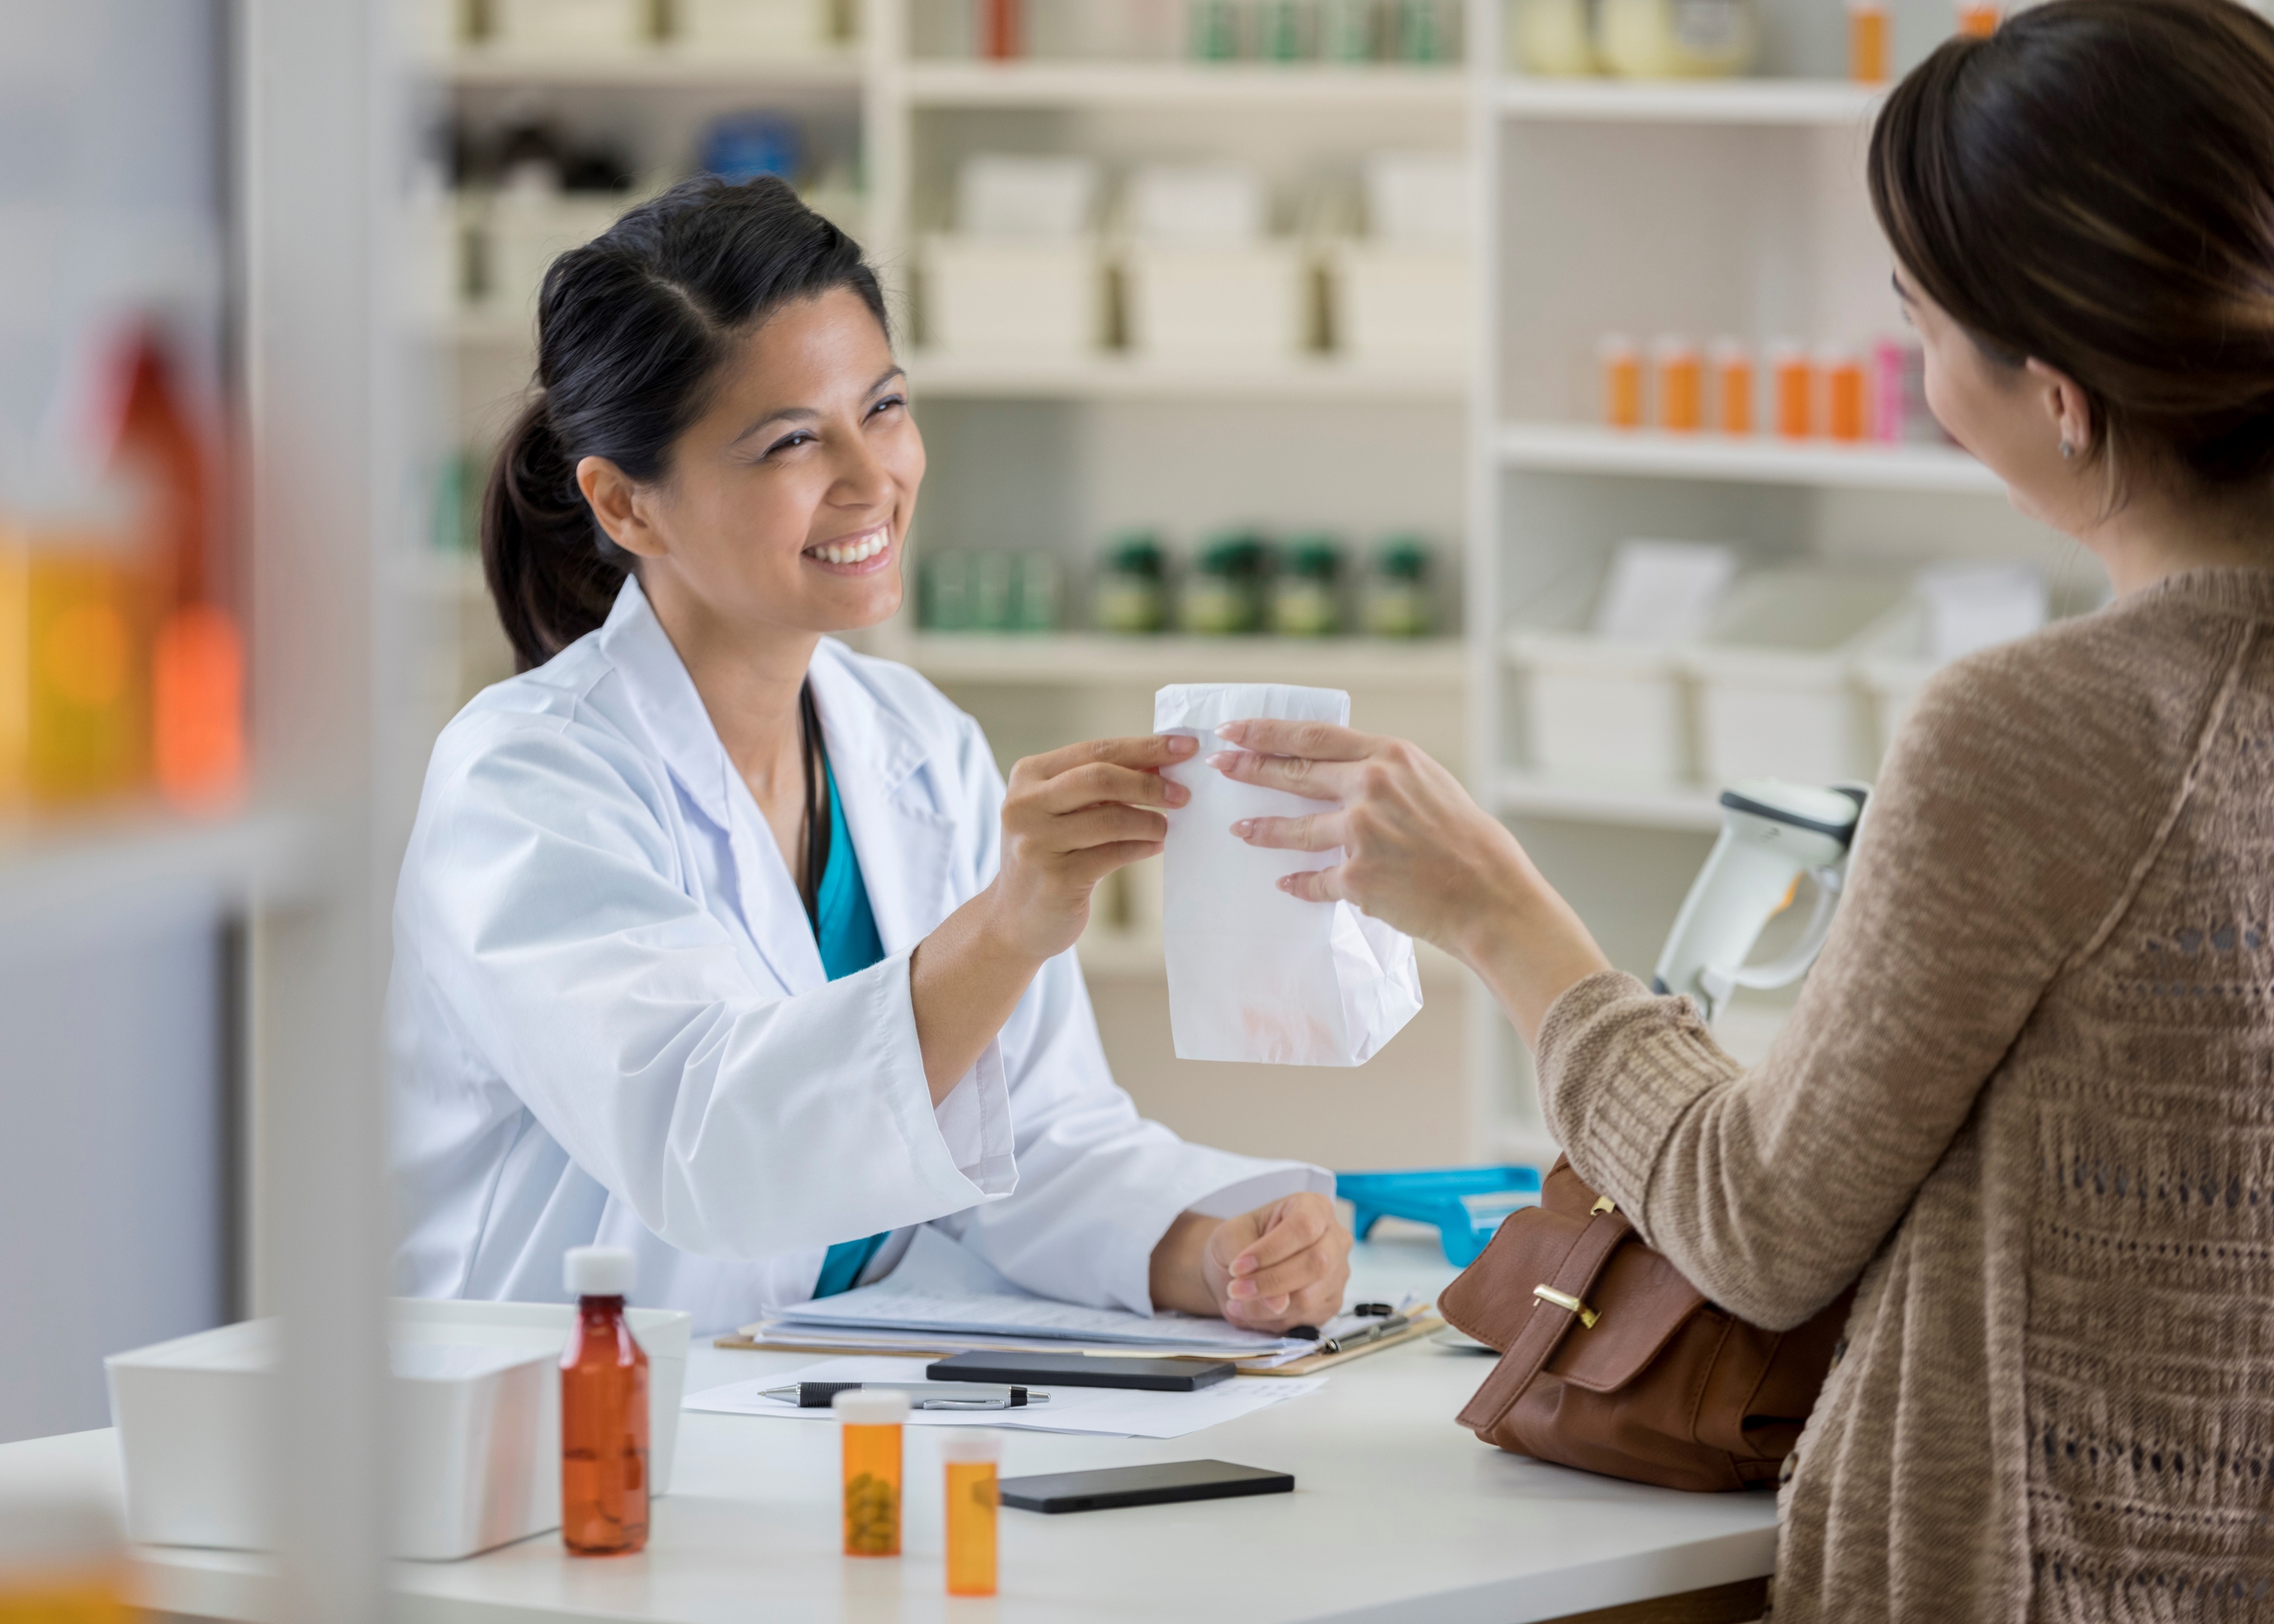 smiling pharmacist handing a paper bag to a customer